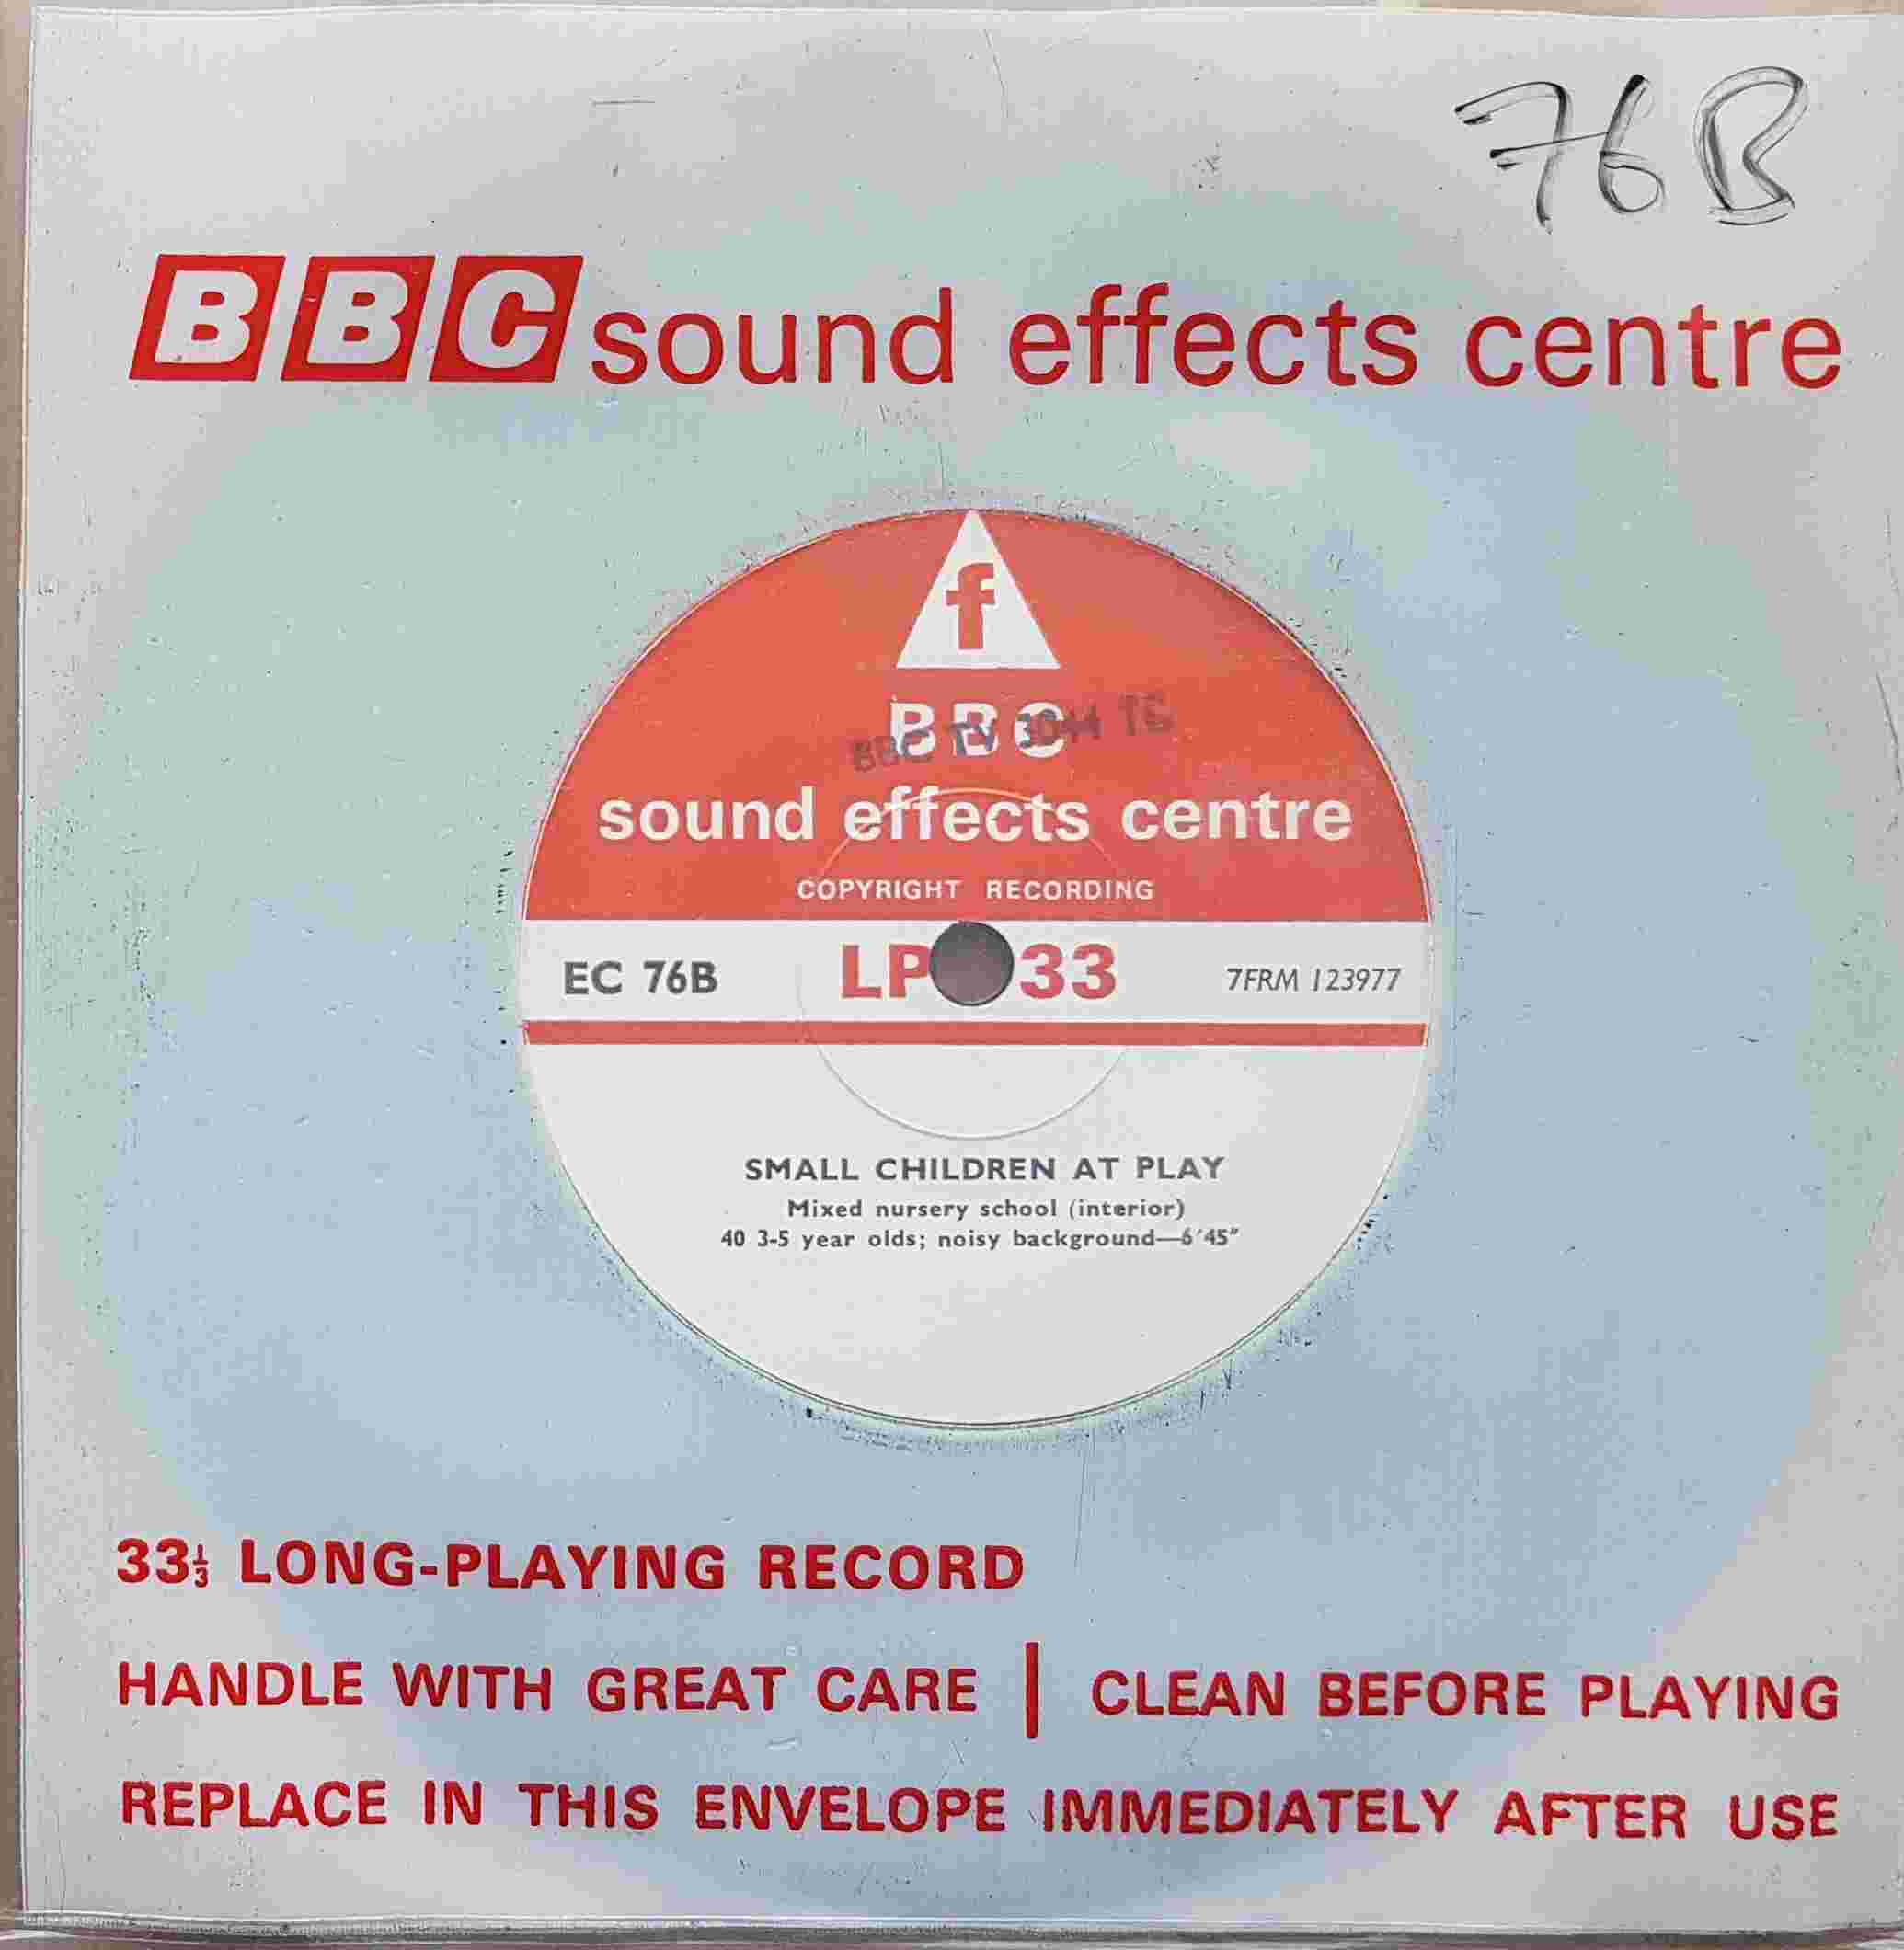 Picture of EC 76B Small children at play by artist Not registered from the BBC singles - Records and Tapes library